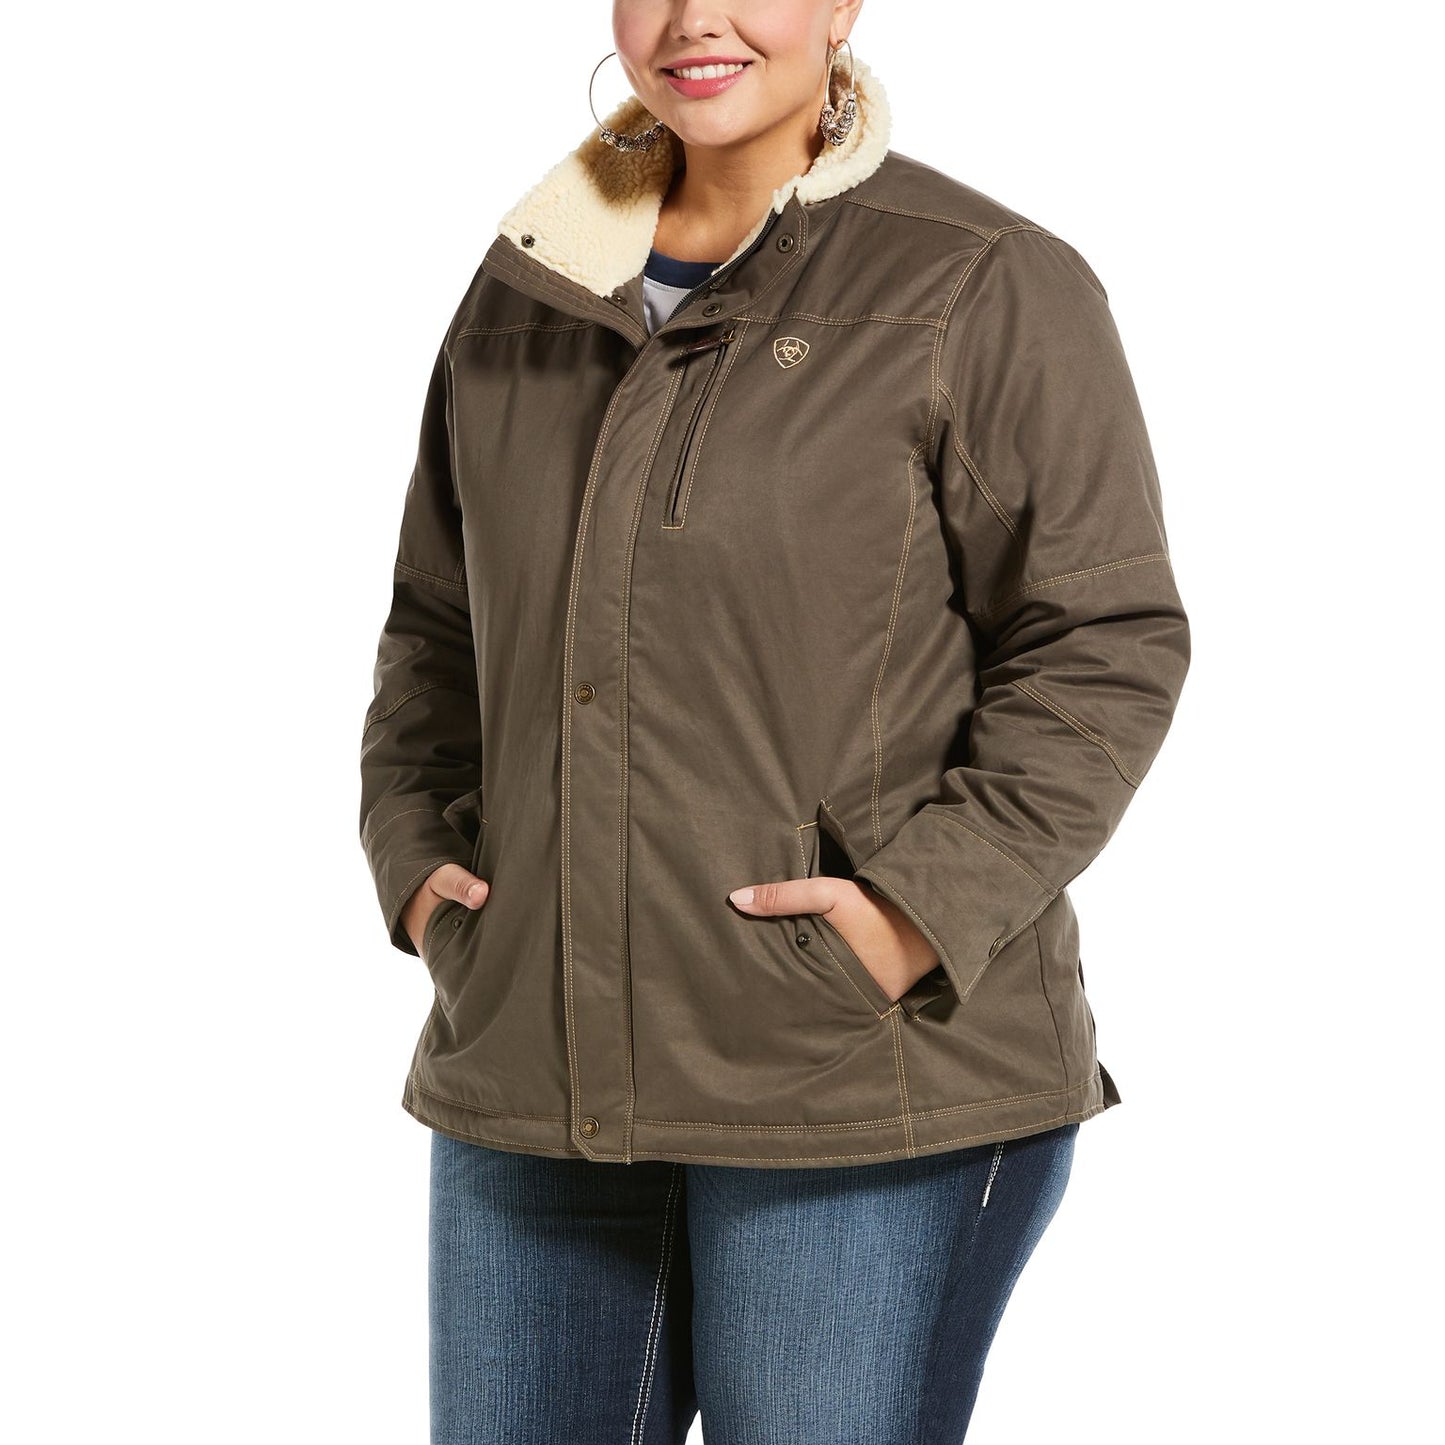 Ariat Women’s REAL Grizzly Utility Jacket Banyan Bark